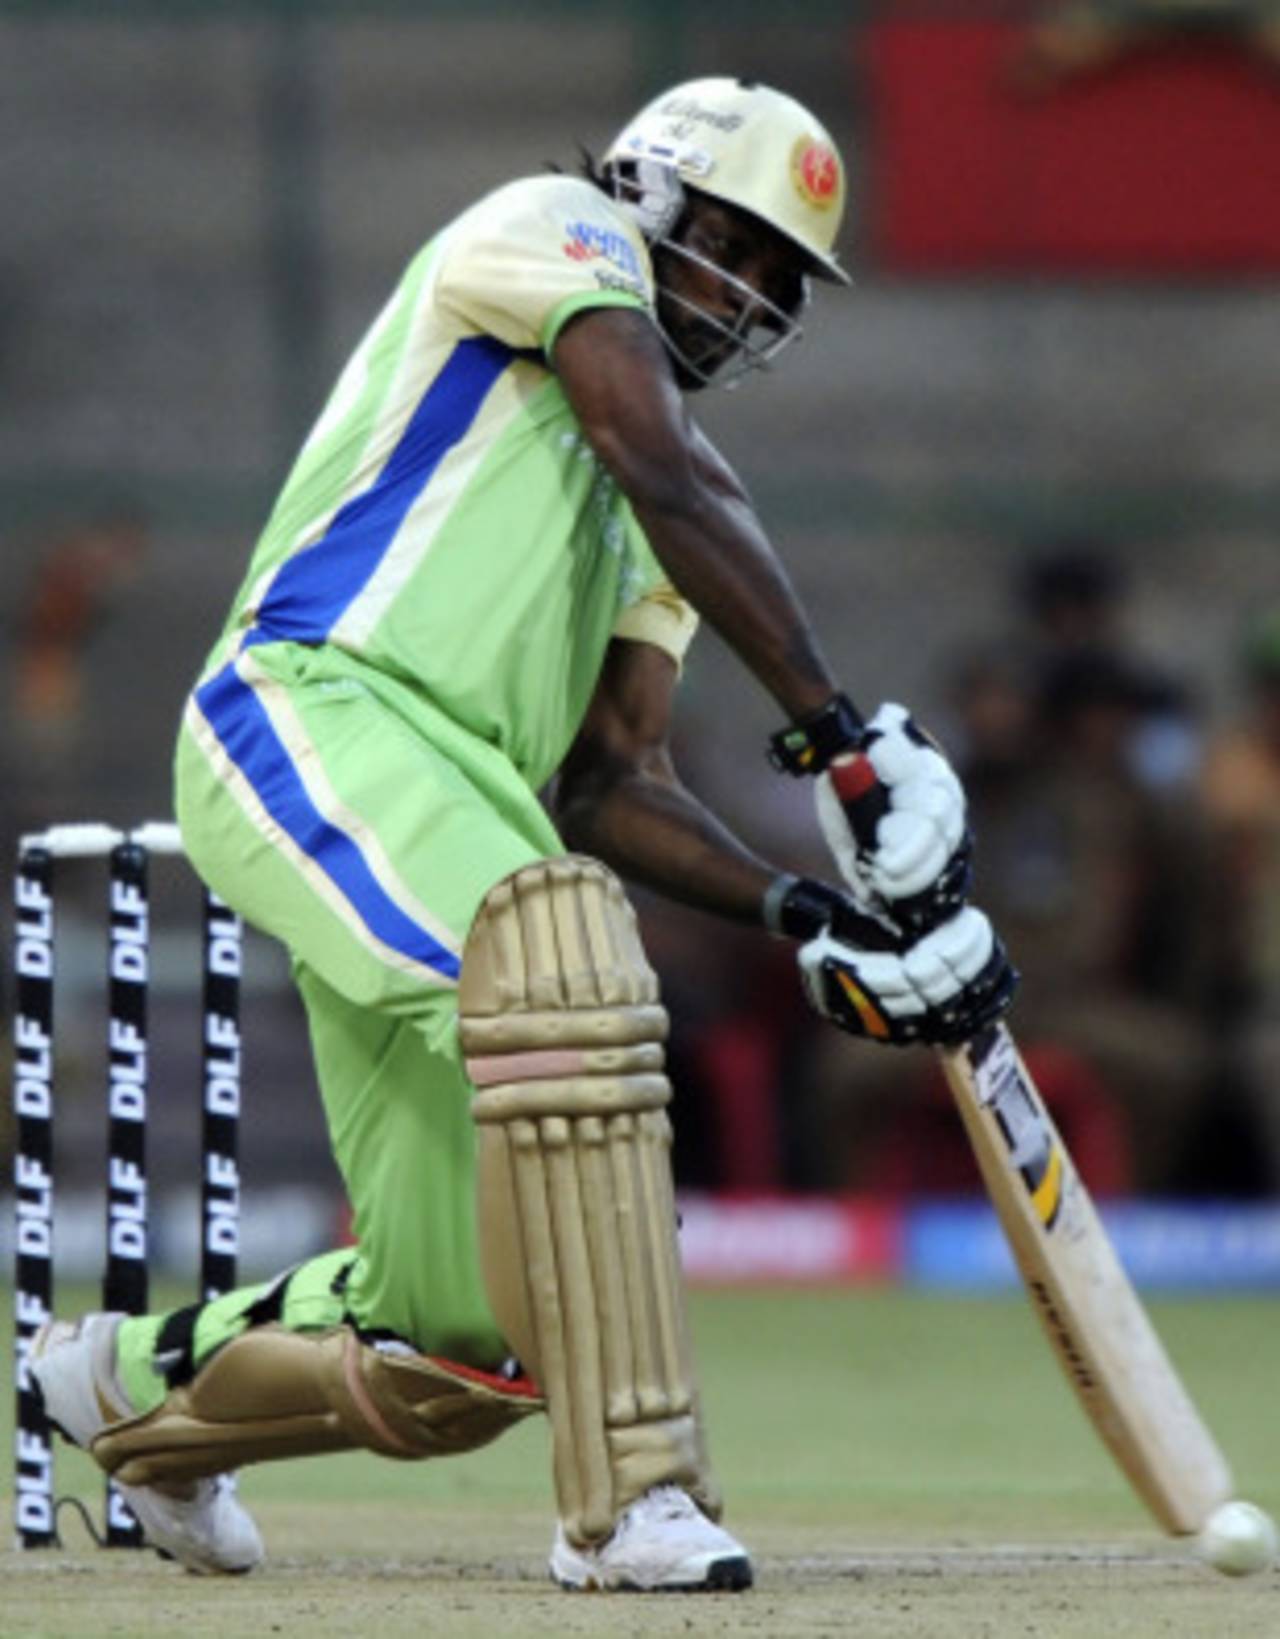 Chris Gayle is about to loft down the ground, Bangalore v Kochi, IPL 2011, Bangalore, May 8, 2011